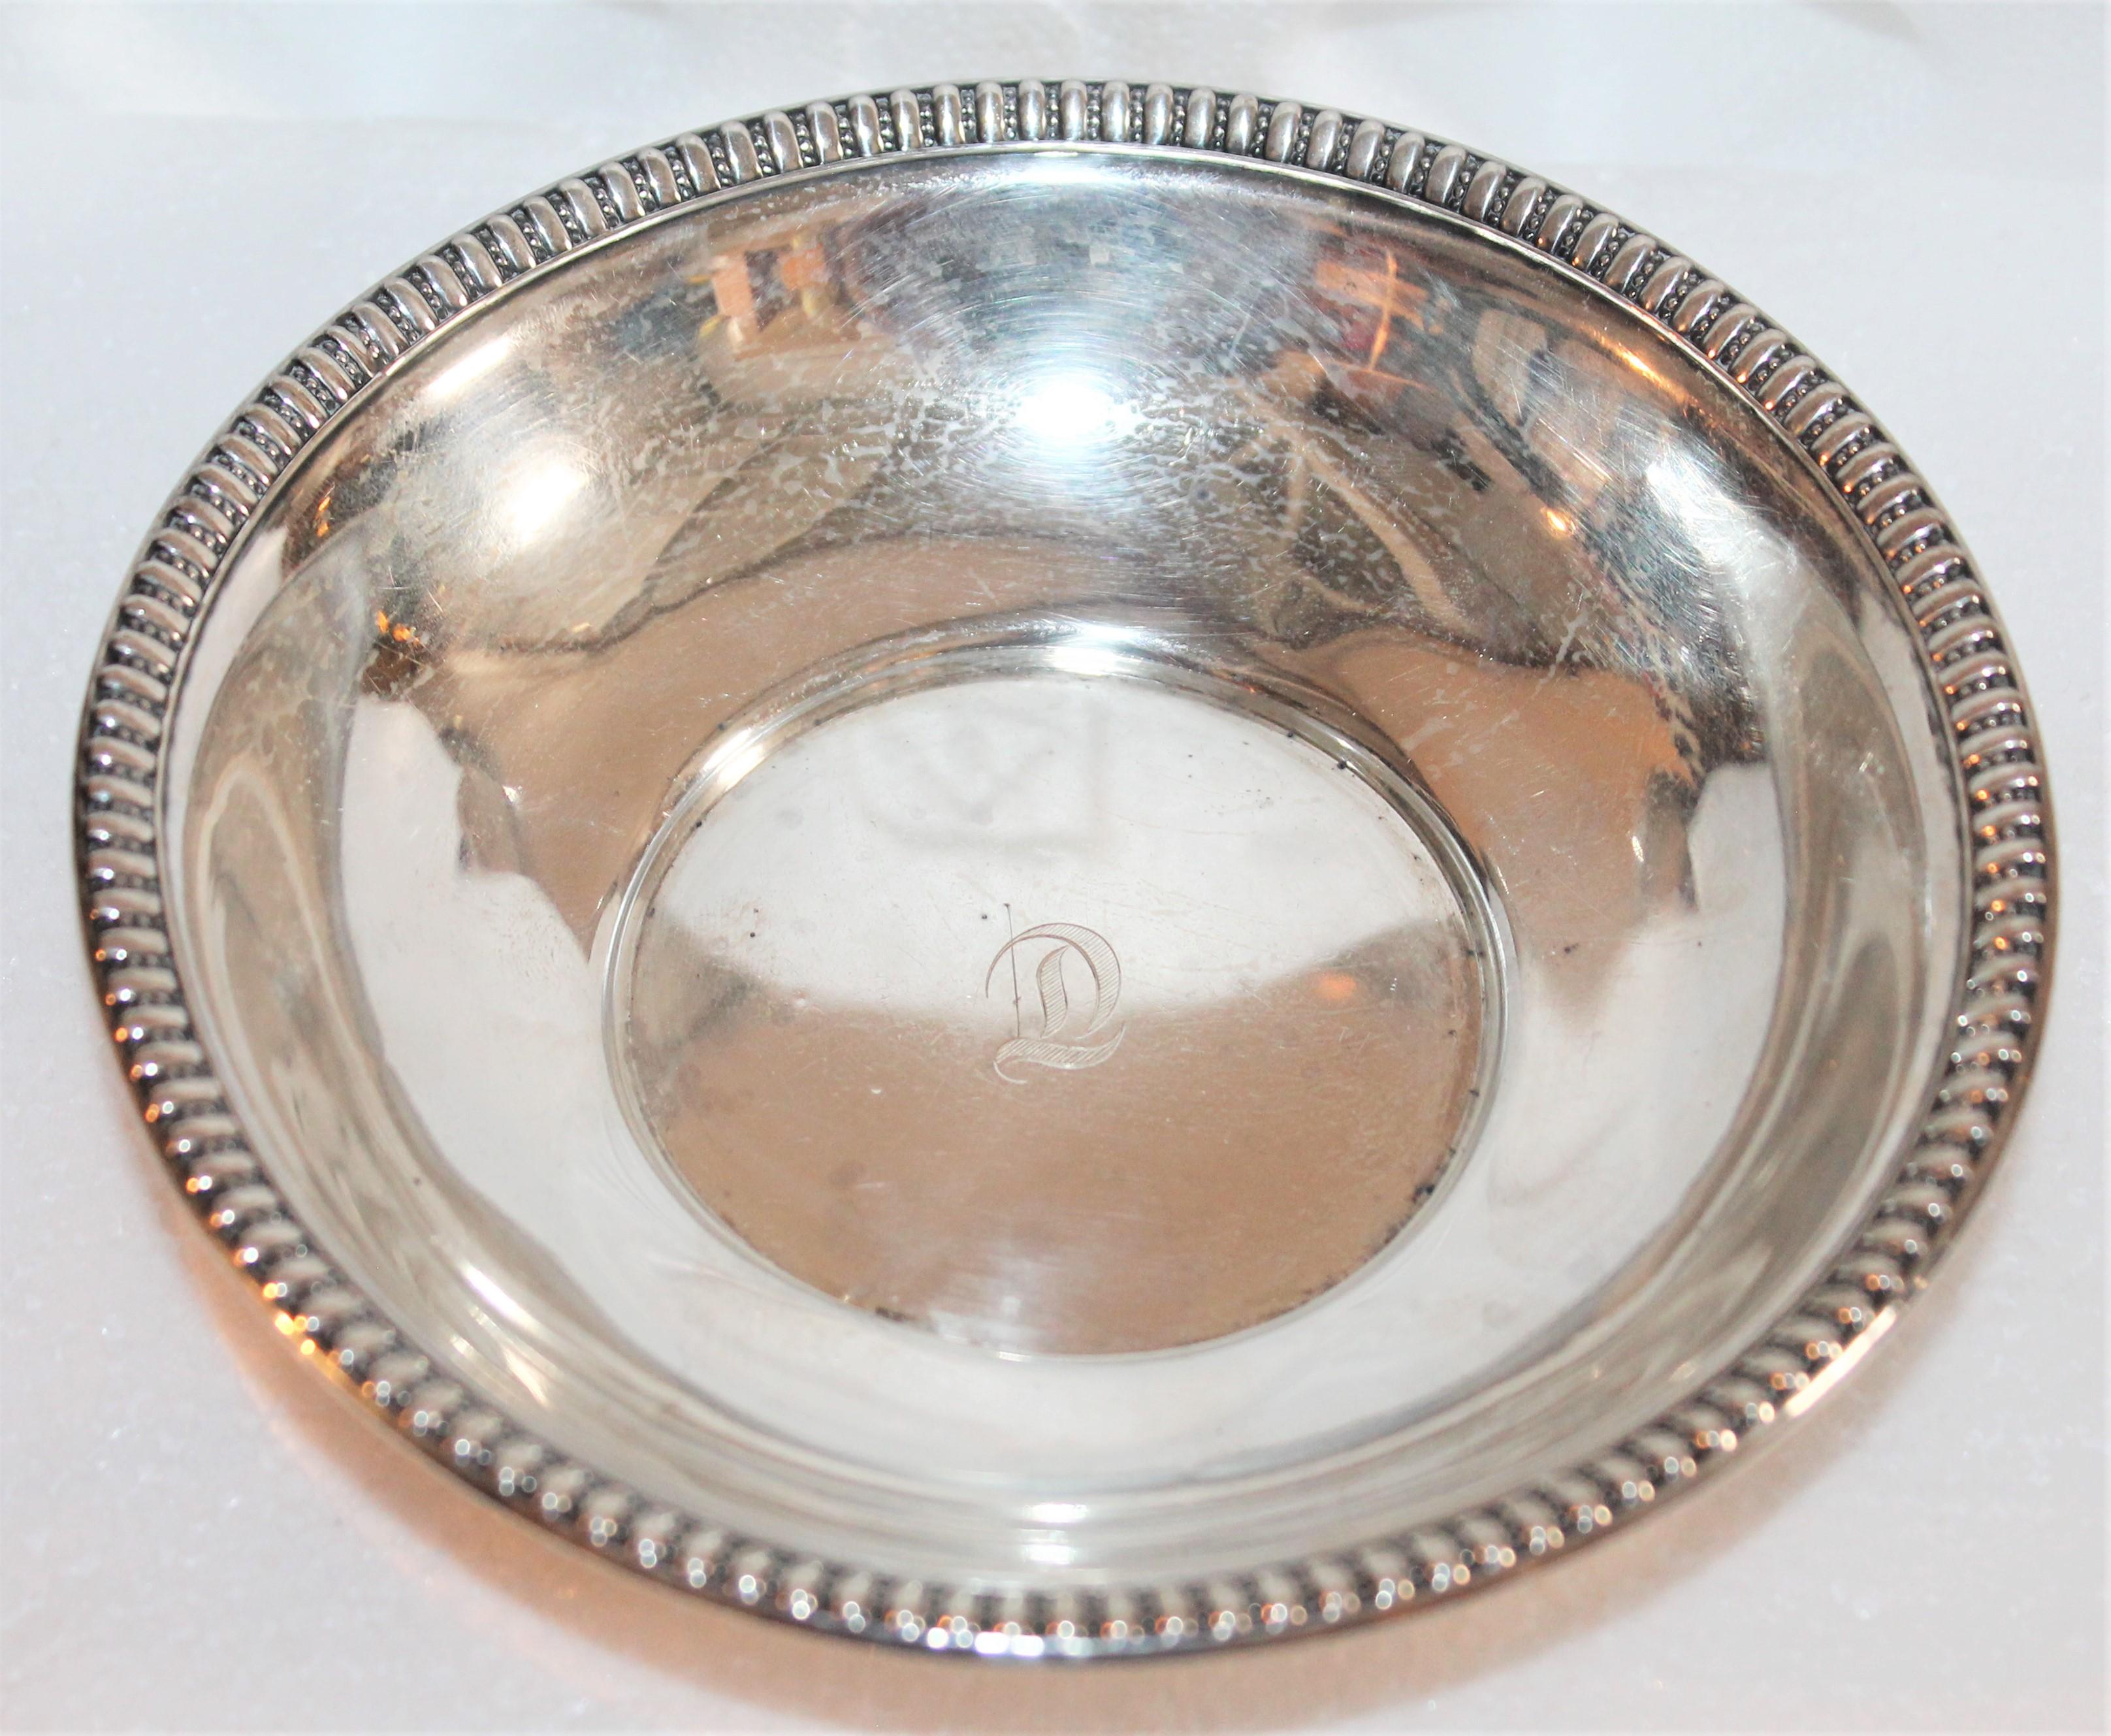 Bowls are stamped and measured below- : All in very good condition.
Wallace sterling bowl - sterling 156 - 6in diameter x1.5 depth
Towle sterling - 6 in diameter x 1.5 depth
Sterling silver A111 - 6.5 in diameter x 1.5 depth
Wallace sterling 110